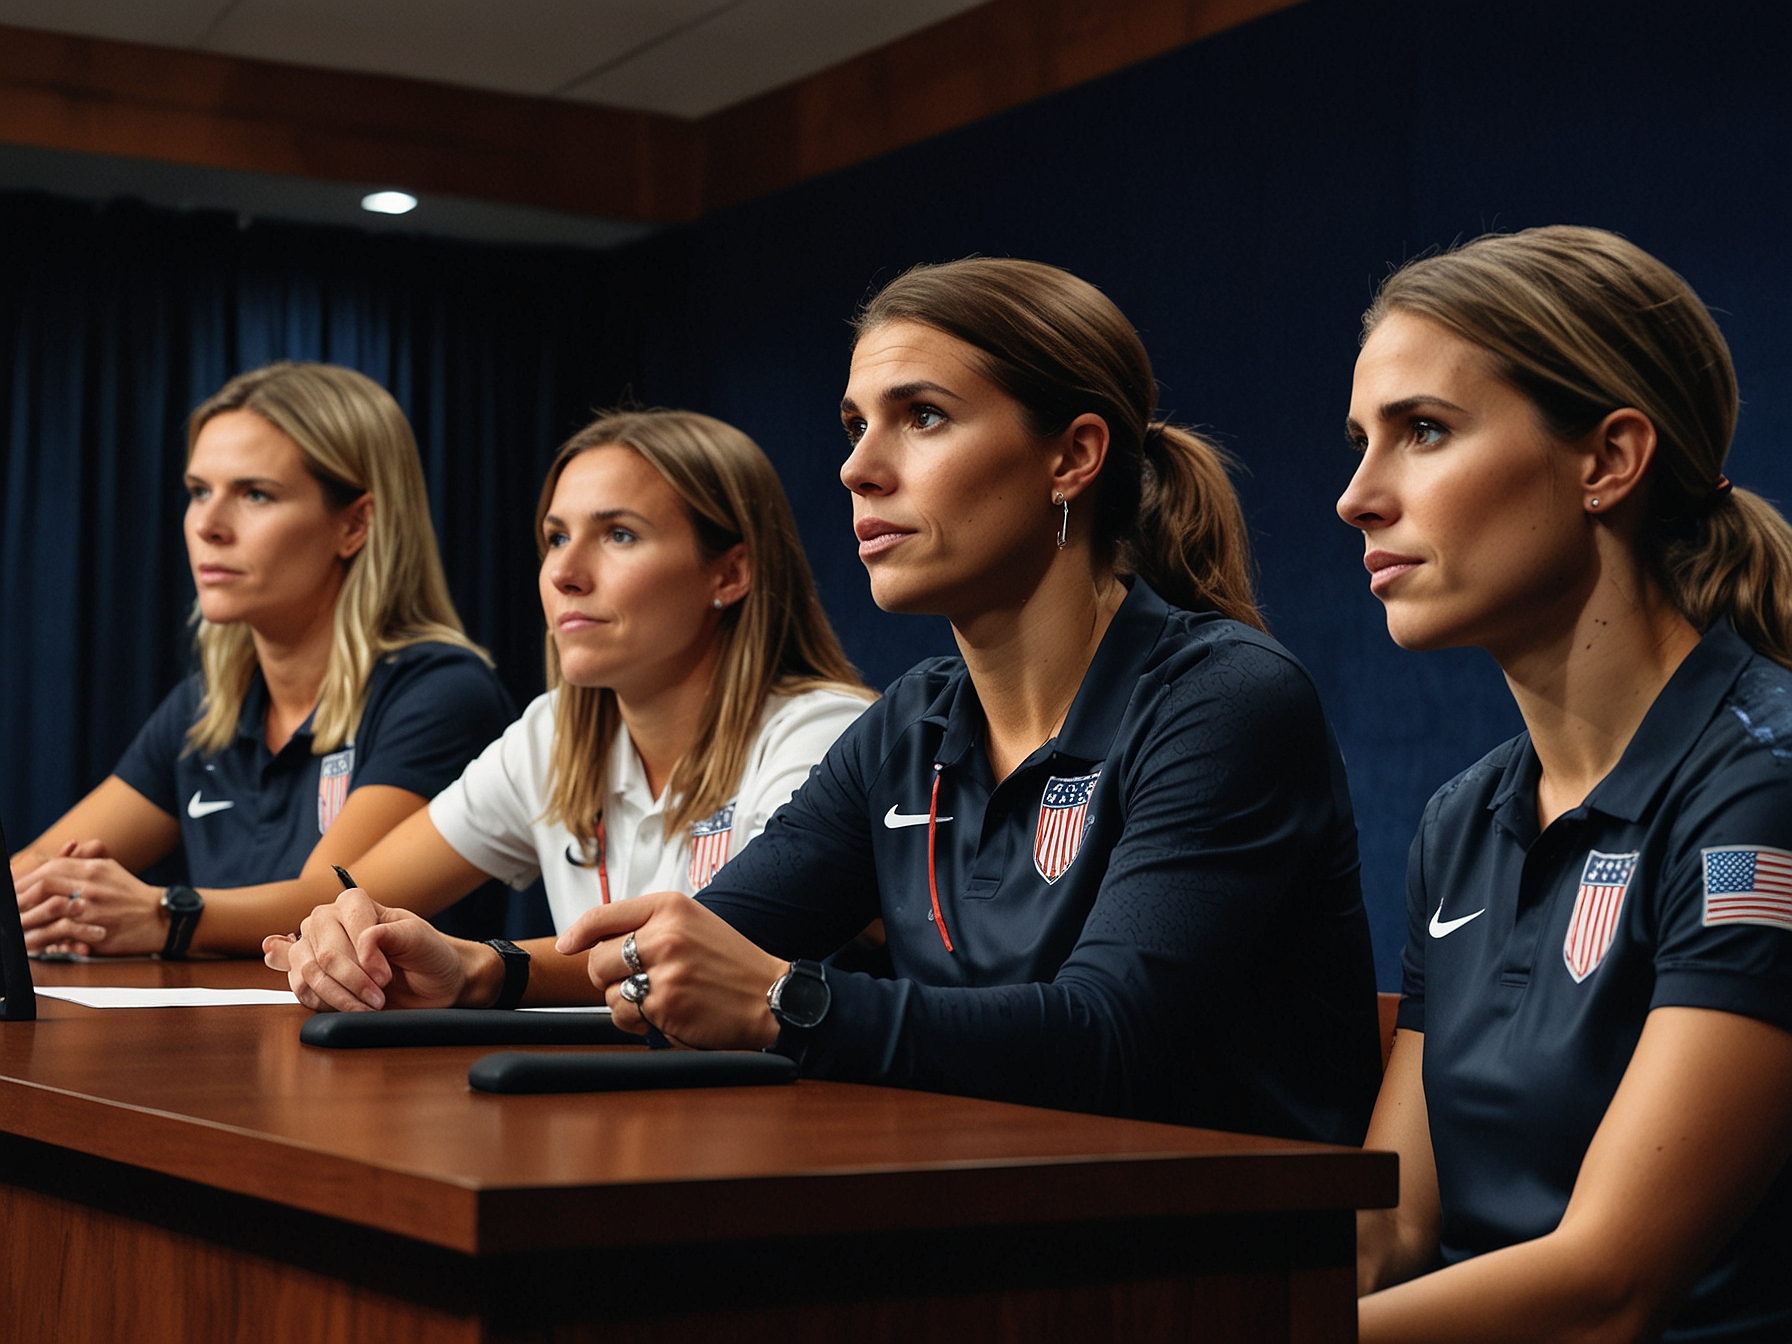 A press conference where the USWNT coaches reveal the new Olympic roster. Coaches explain notable exclusions, including Alex Morgan, and emphasize the future focus of the team.